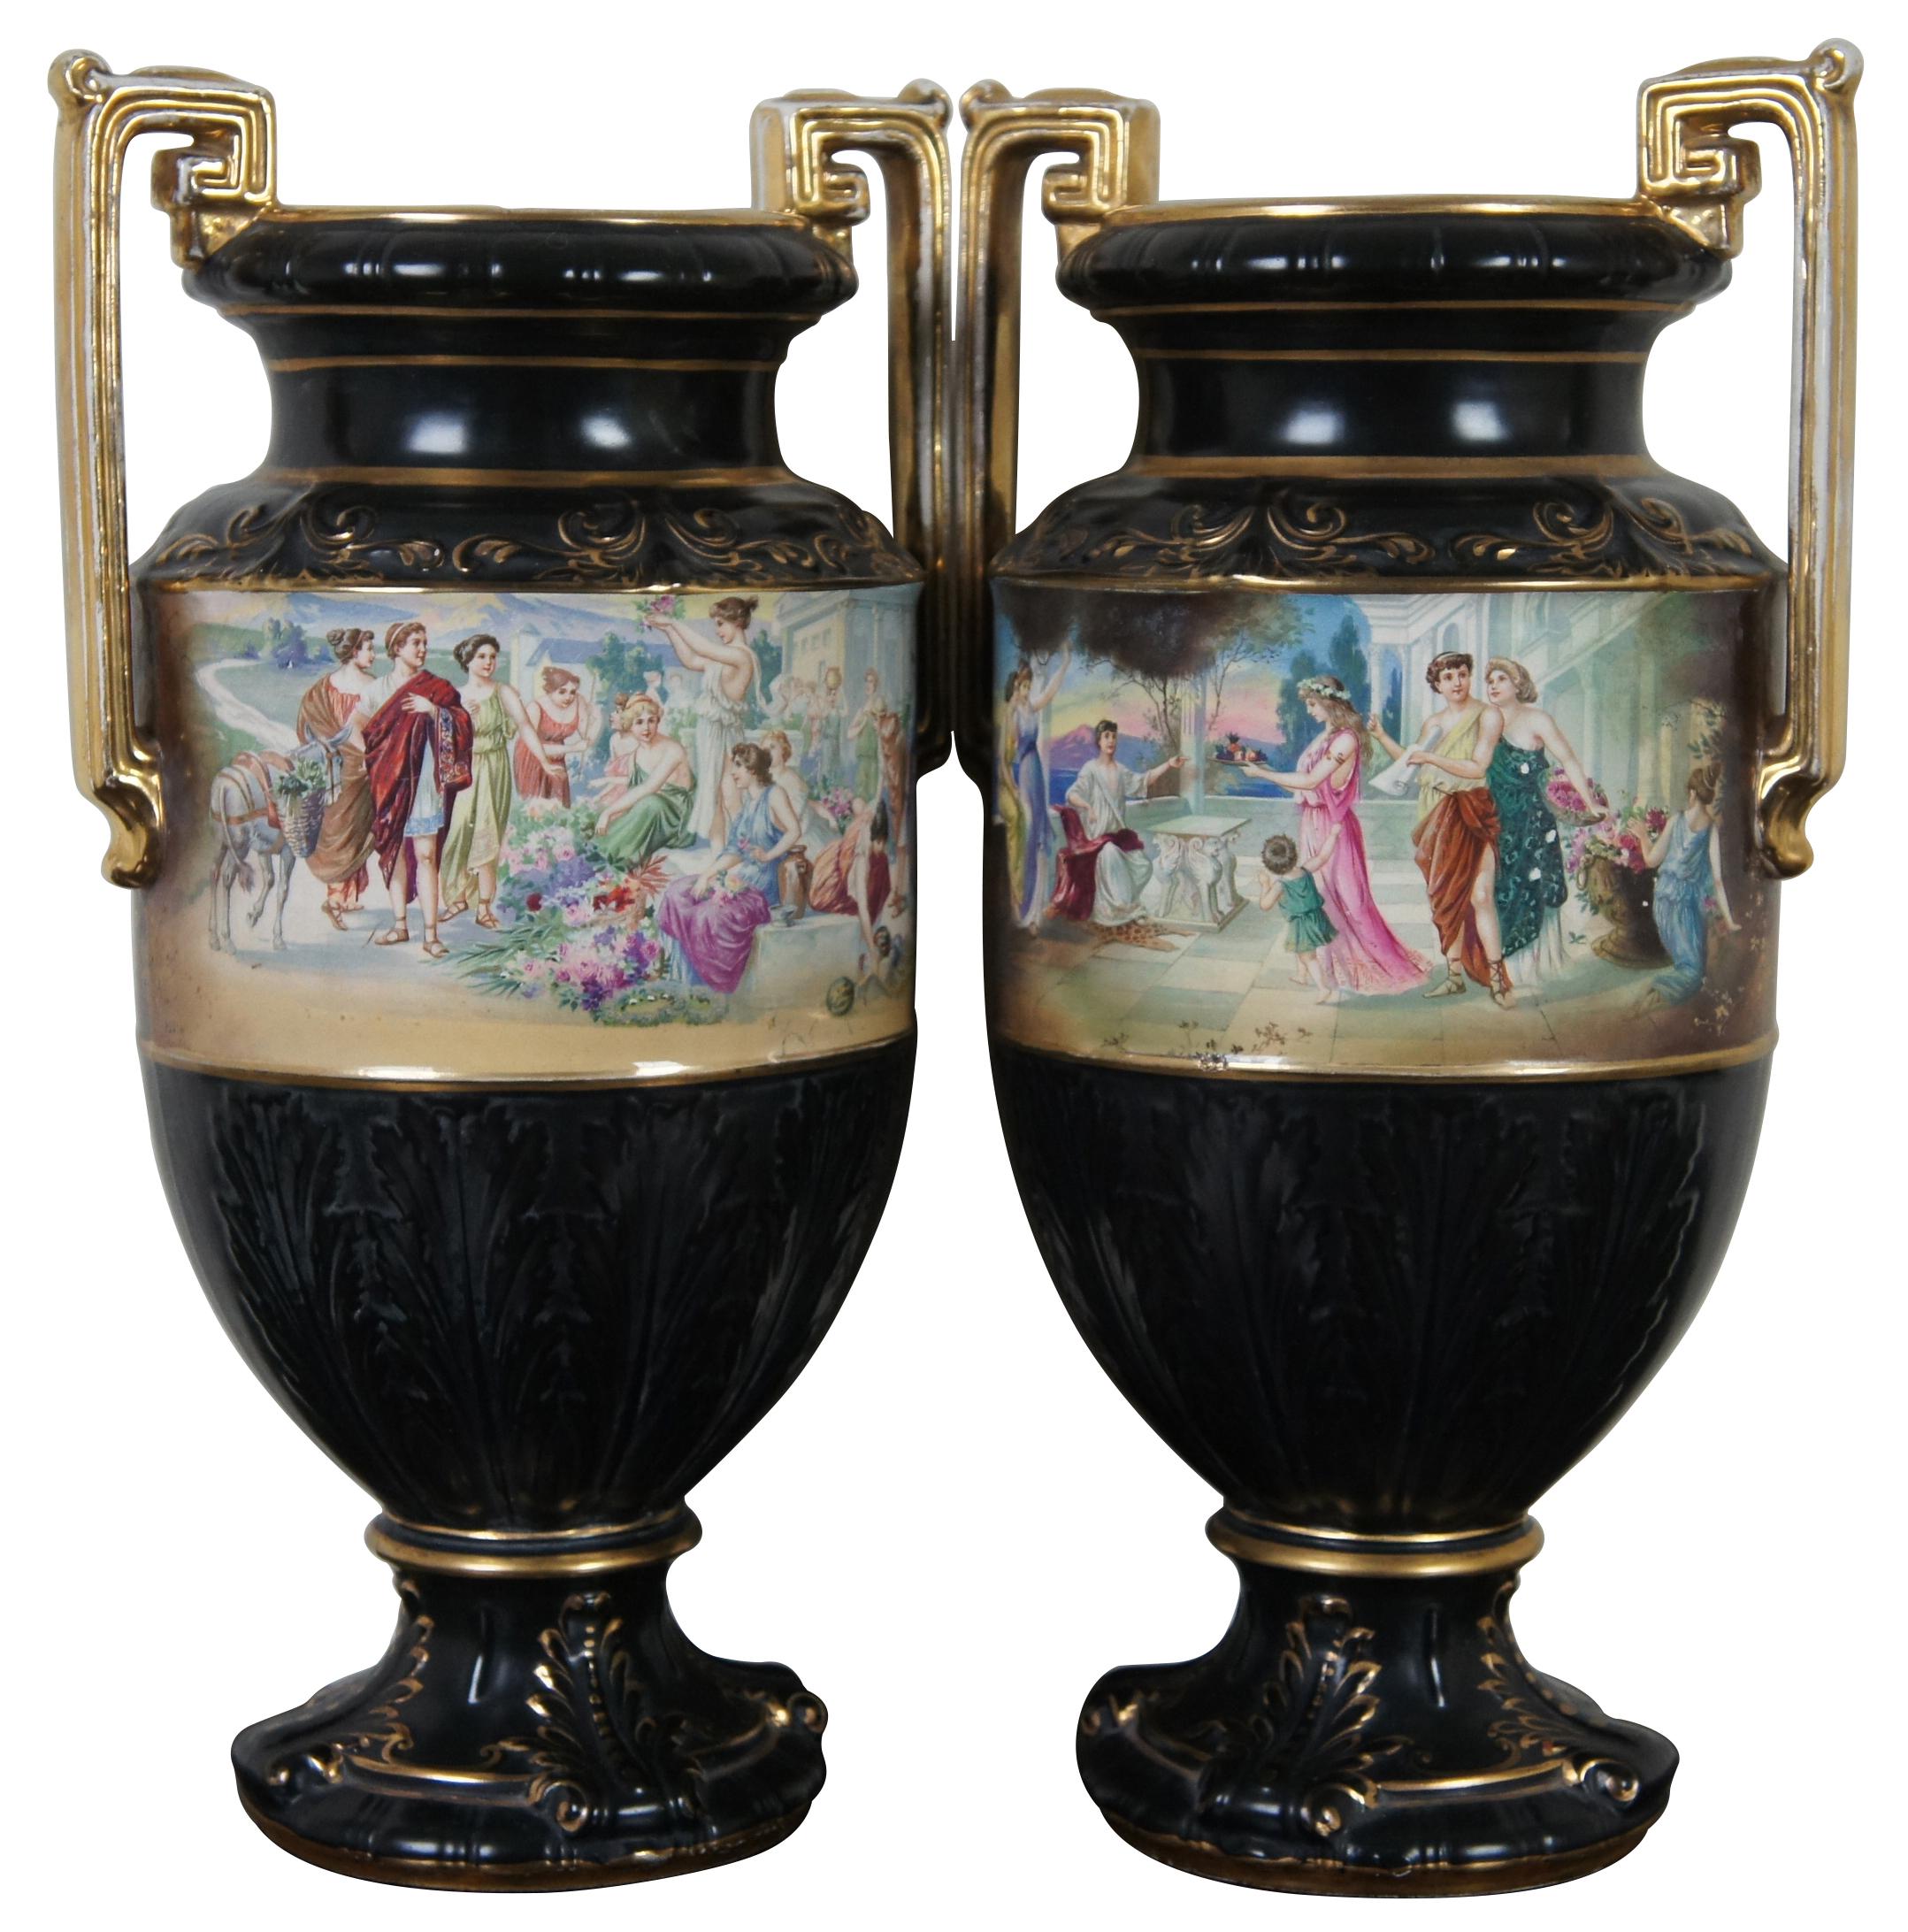 Two black porcelain mantel vases in the shape of Grecian urns with Greek key handles, acanthus leaves, gold accents and idyllic scenes of figures, signed Lesoir. Made in England.
  